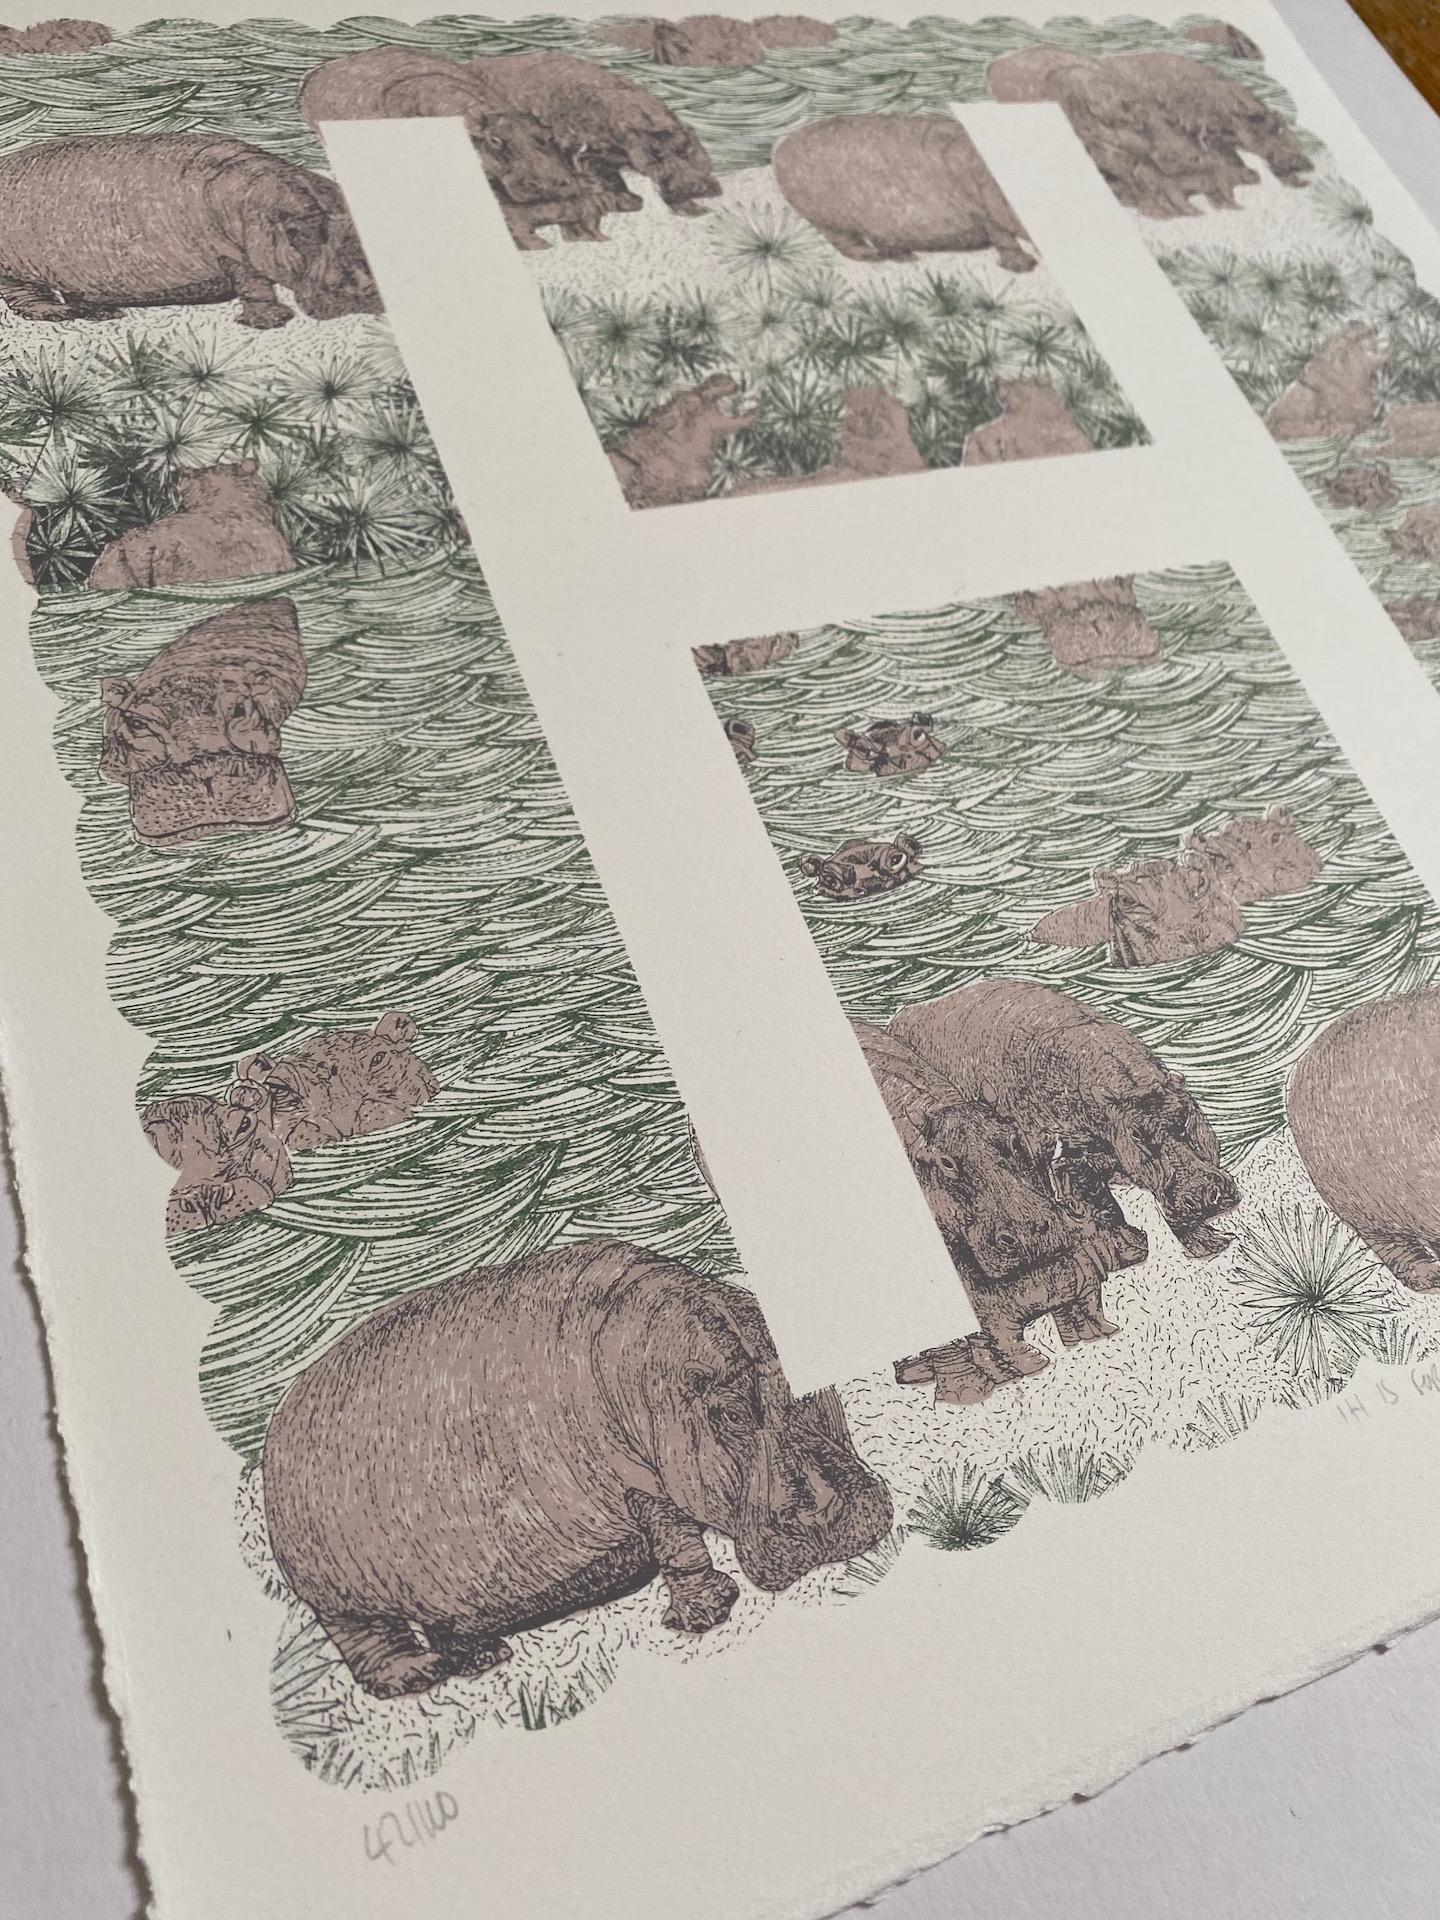 Clare Halifax, H is for Hippo, Limited Edition Artwork, Bright Art, Animal Art 5